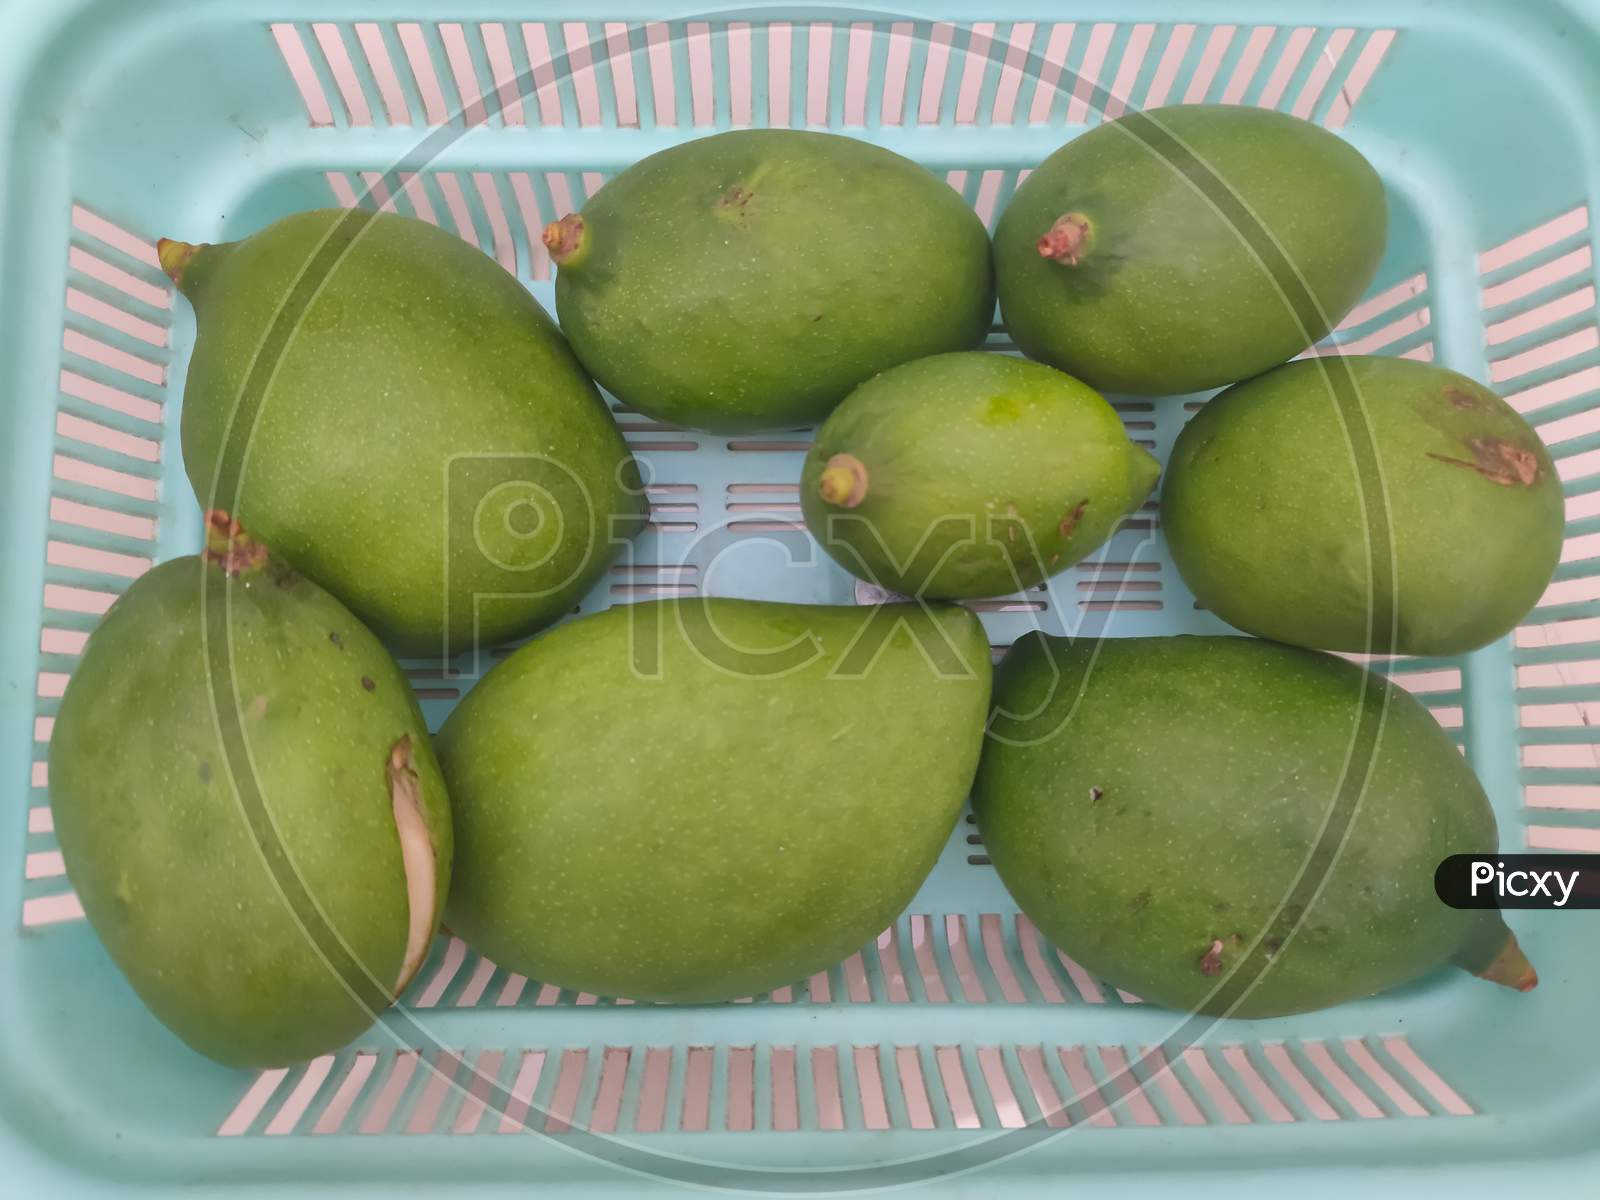 Green Mangoes On Plastic Basket And Old Wooden Floor Background.